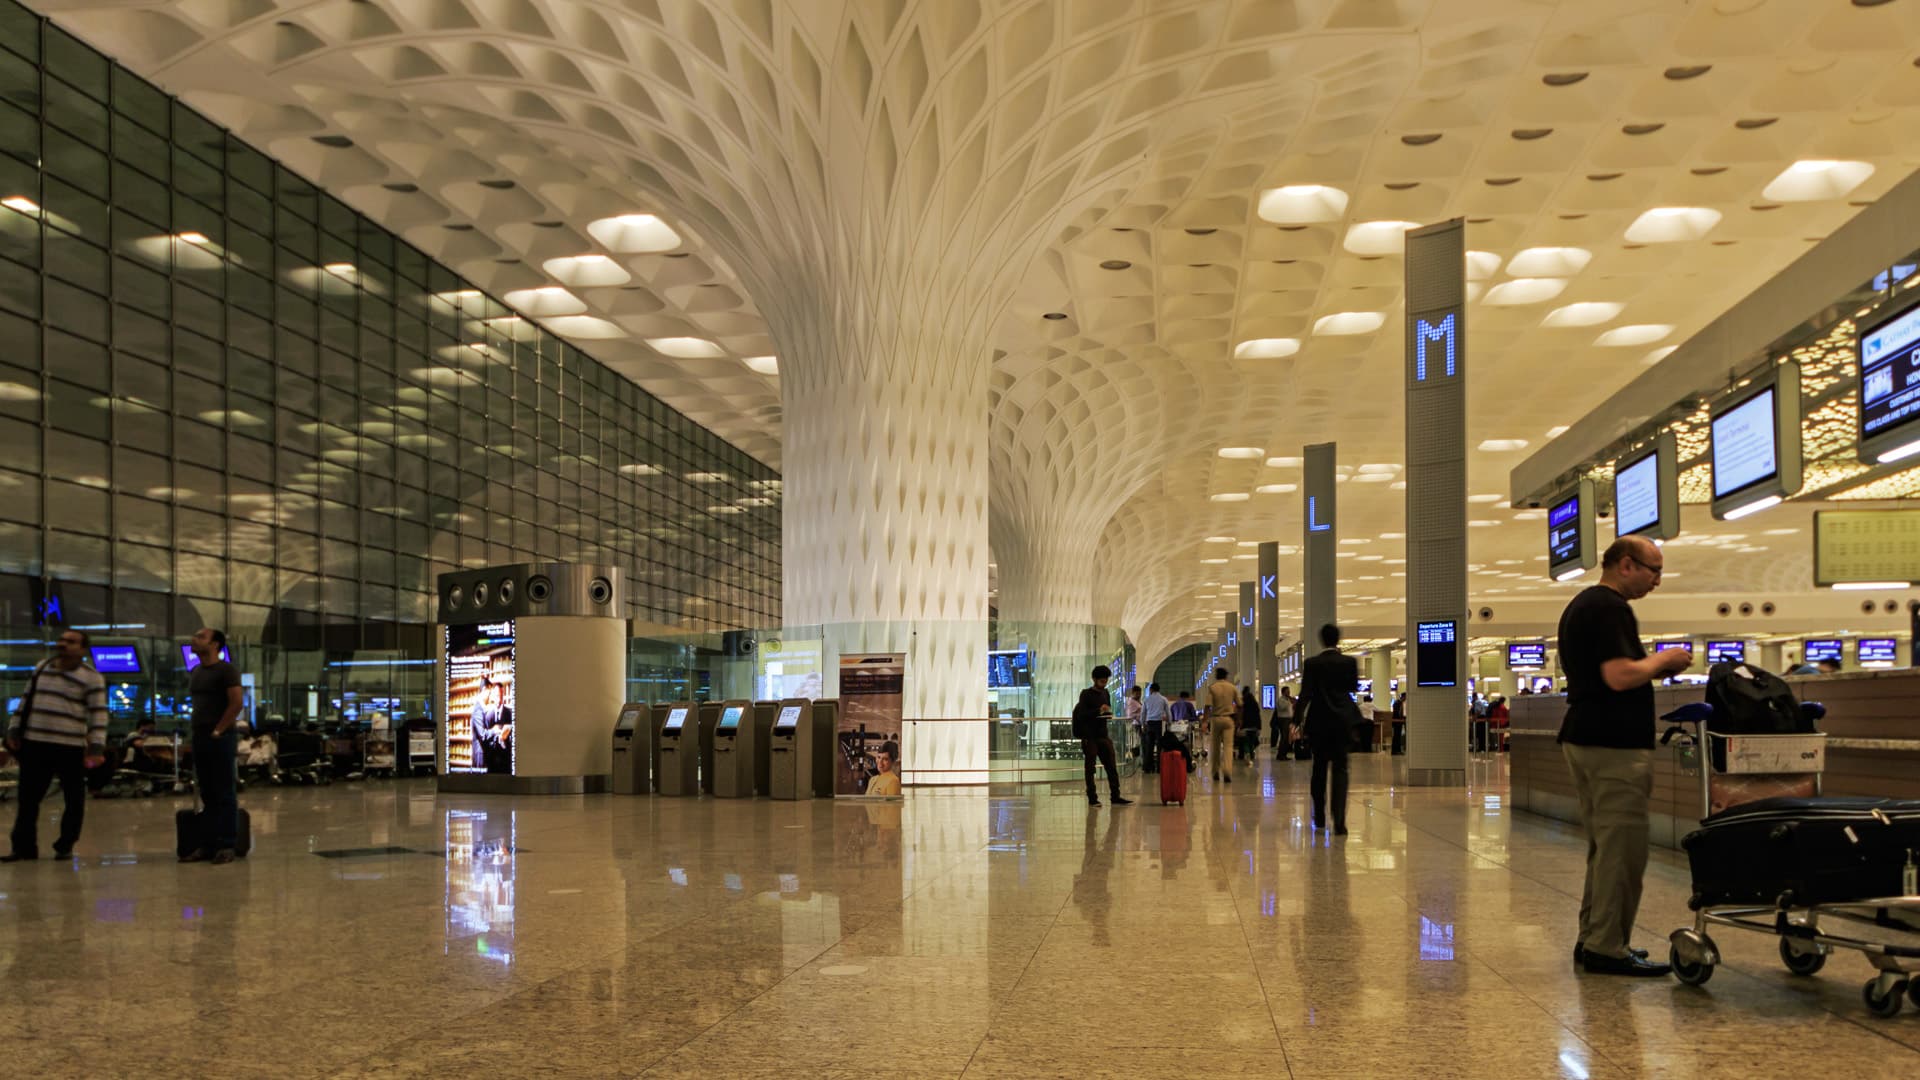 Mumbai airport says passengers from Middle East, Europe will be subject to institutional quarantine